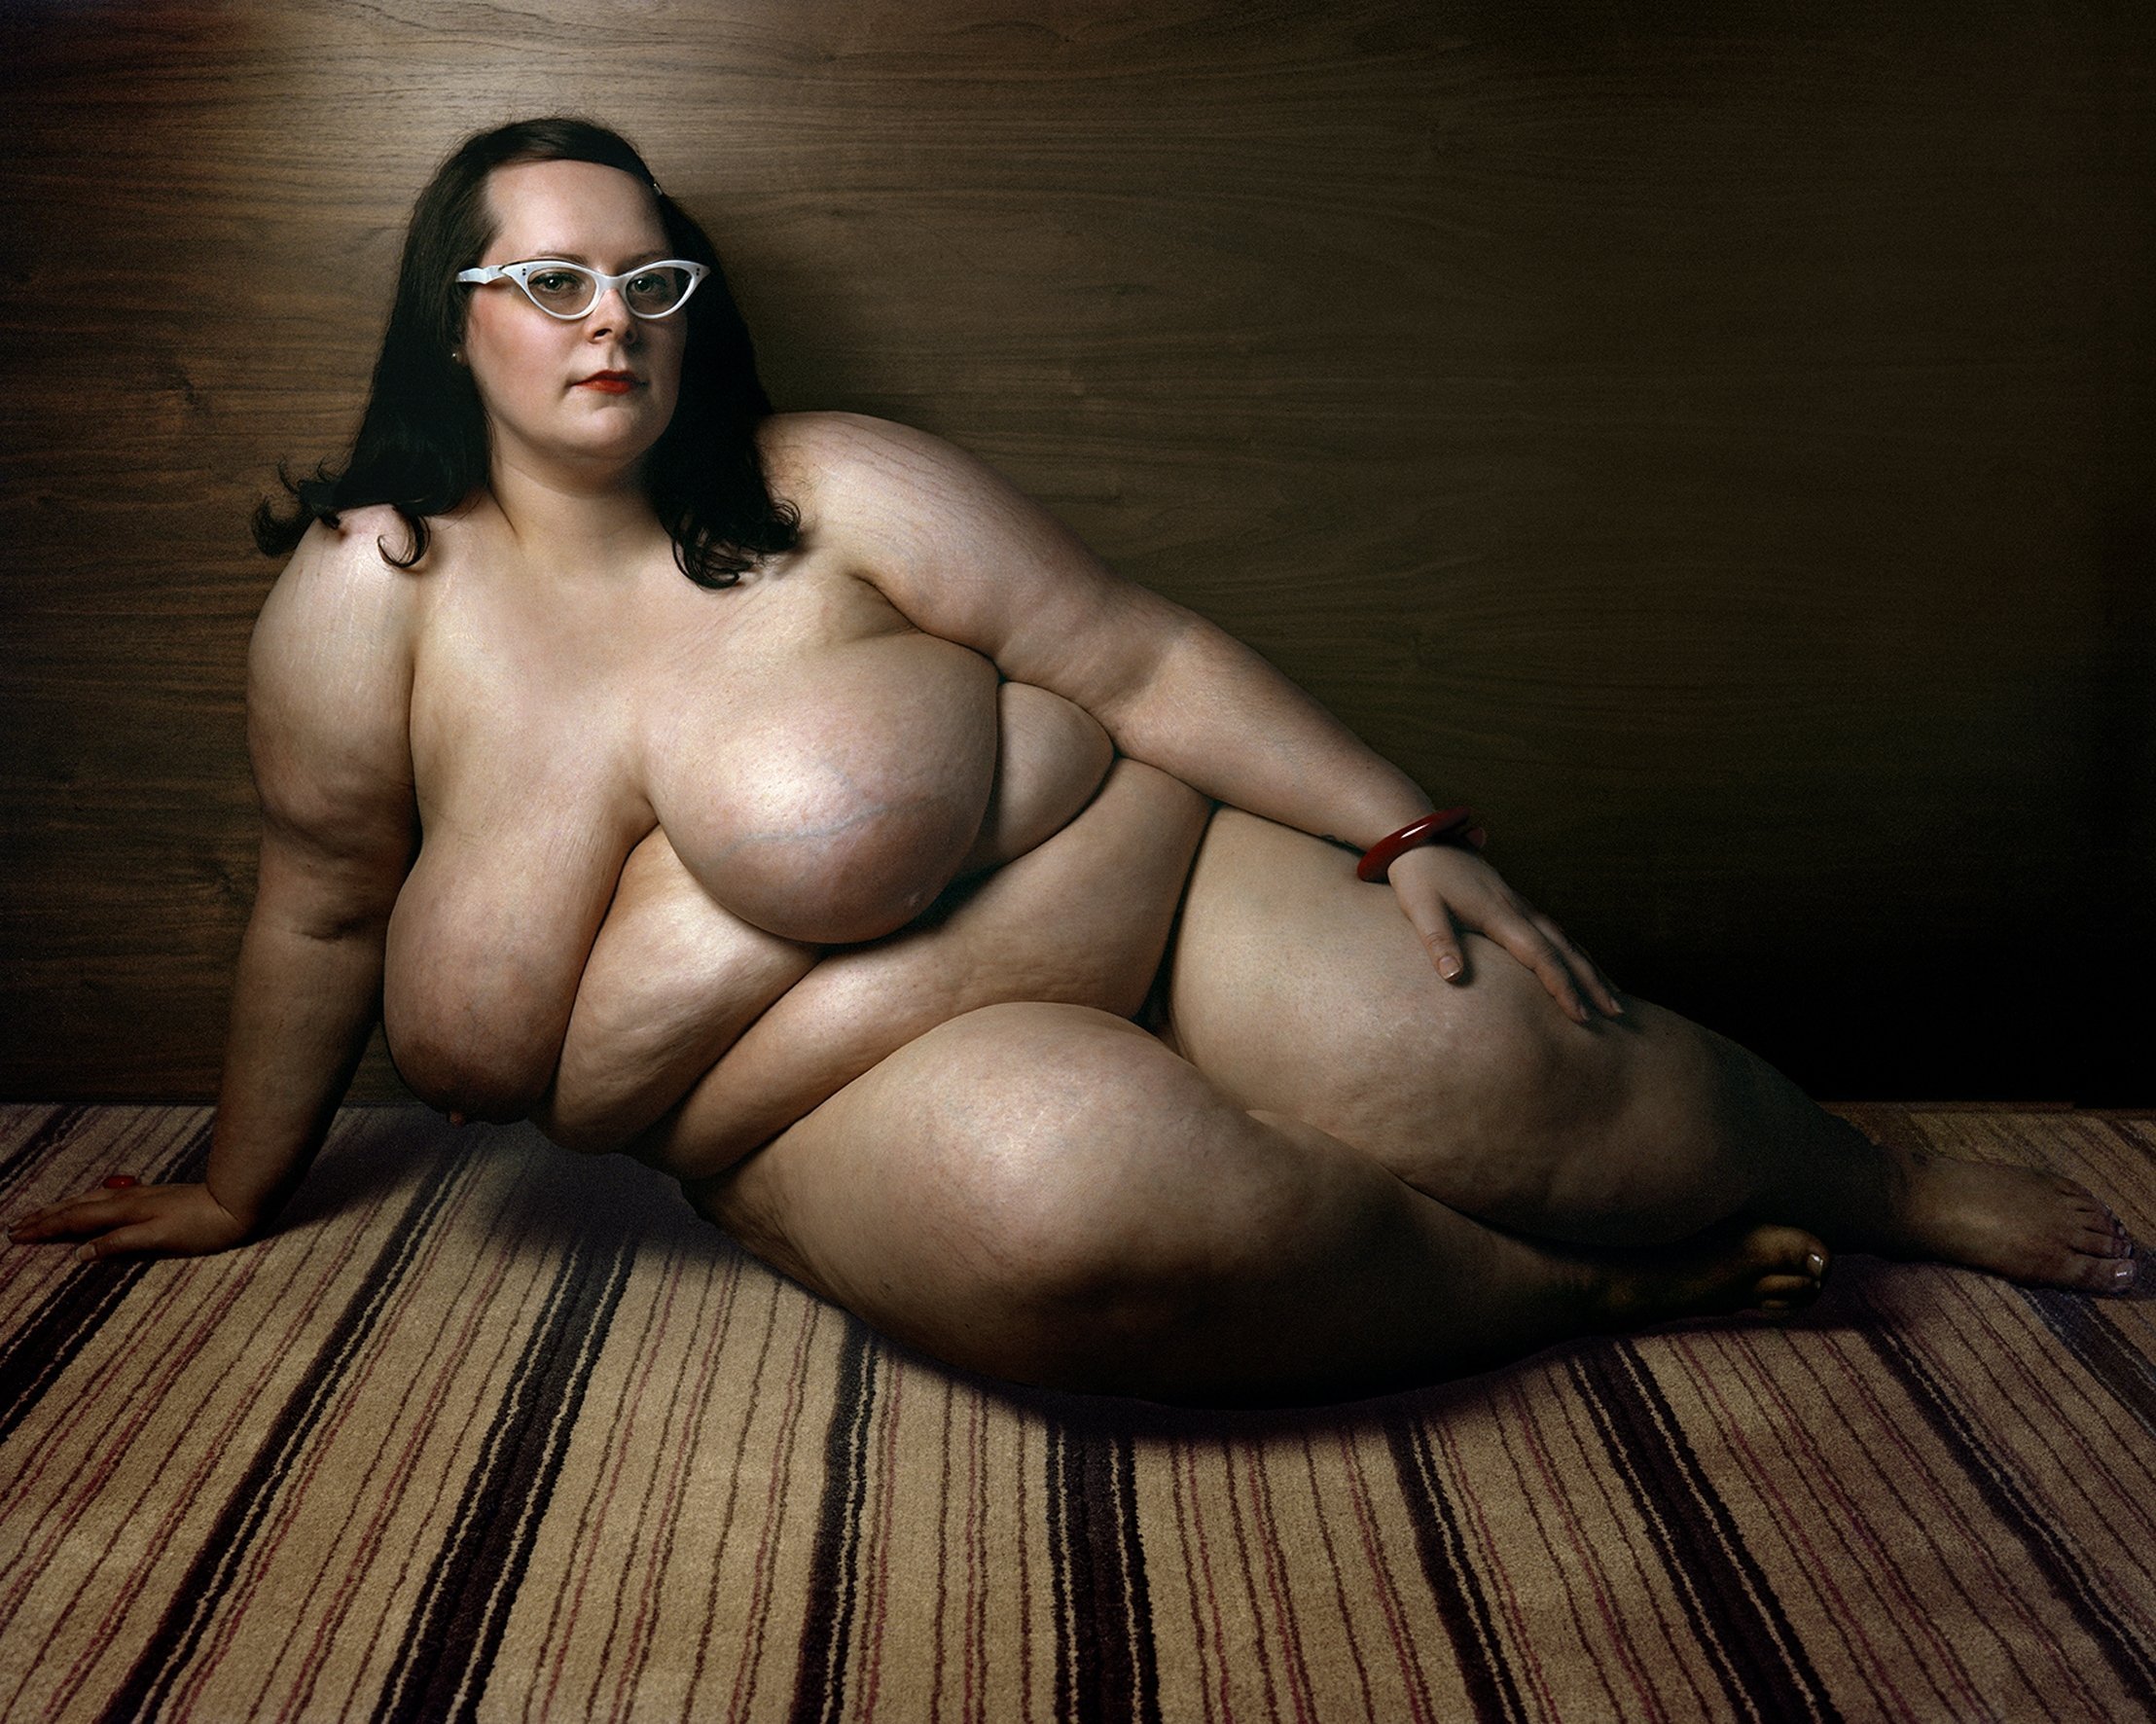 Fat Wife Naked On Couch - Fat Women Posing Nude - 31 photos